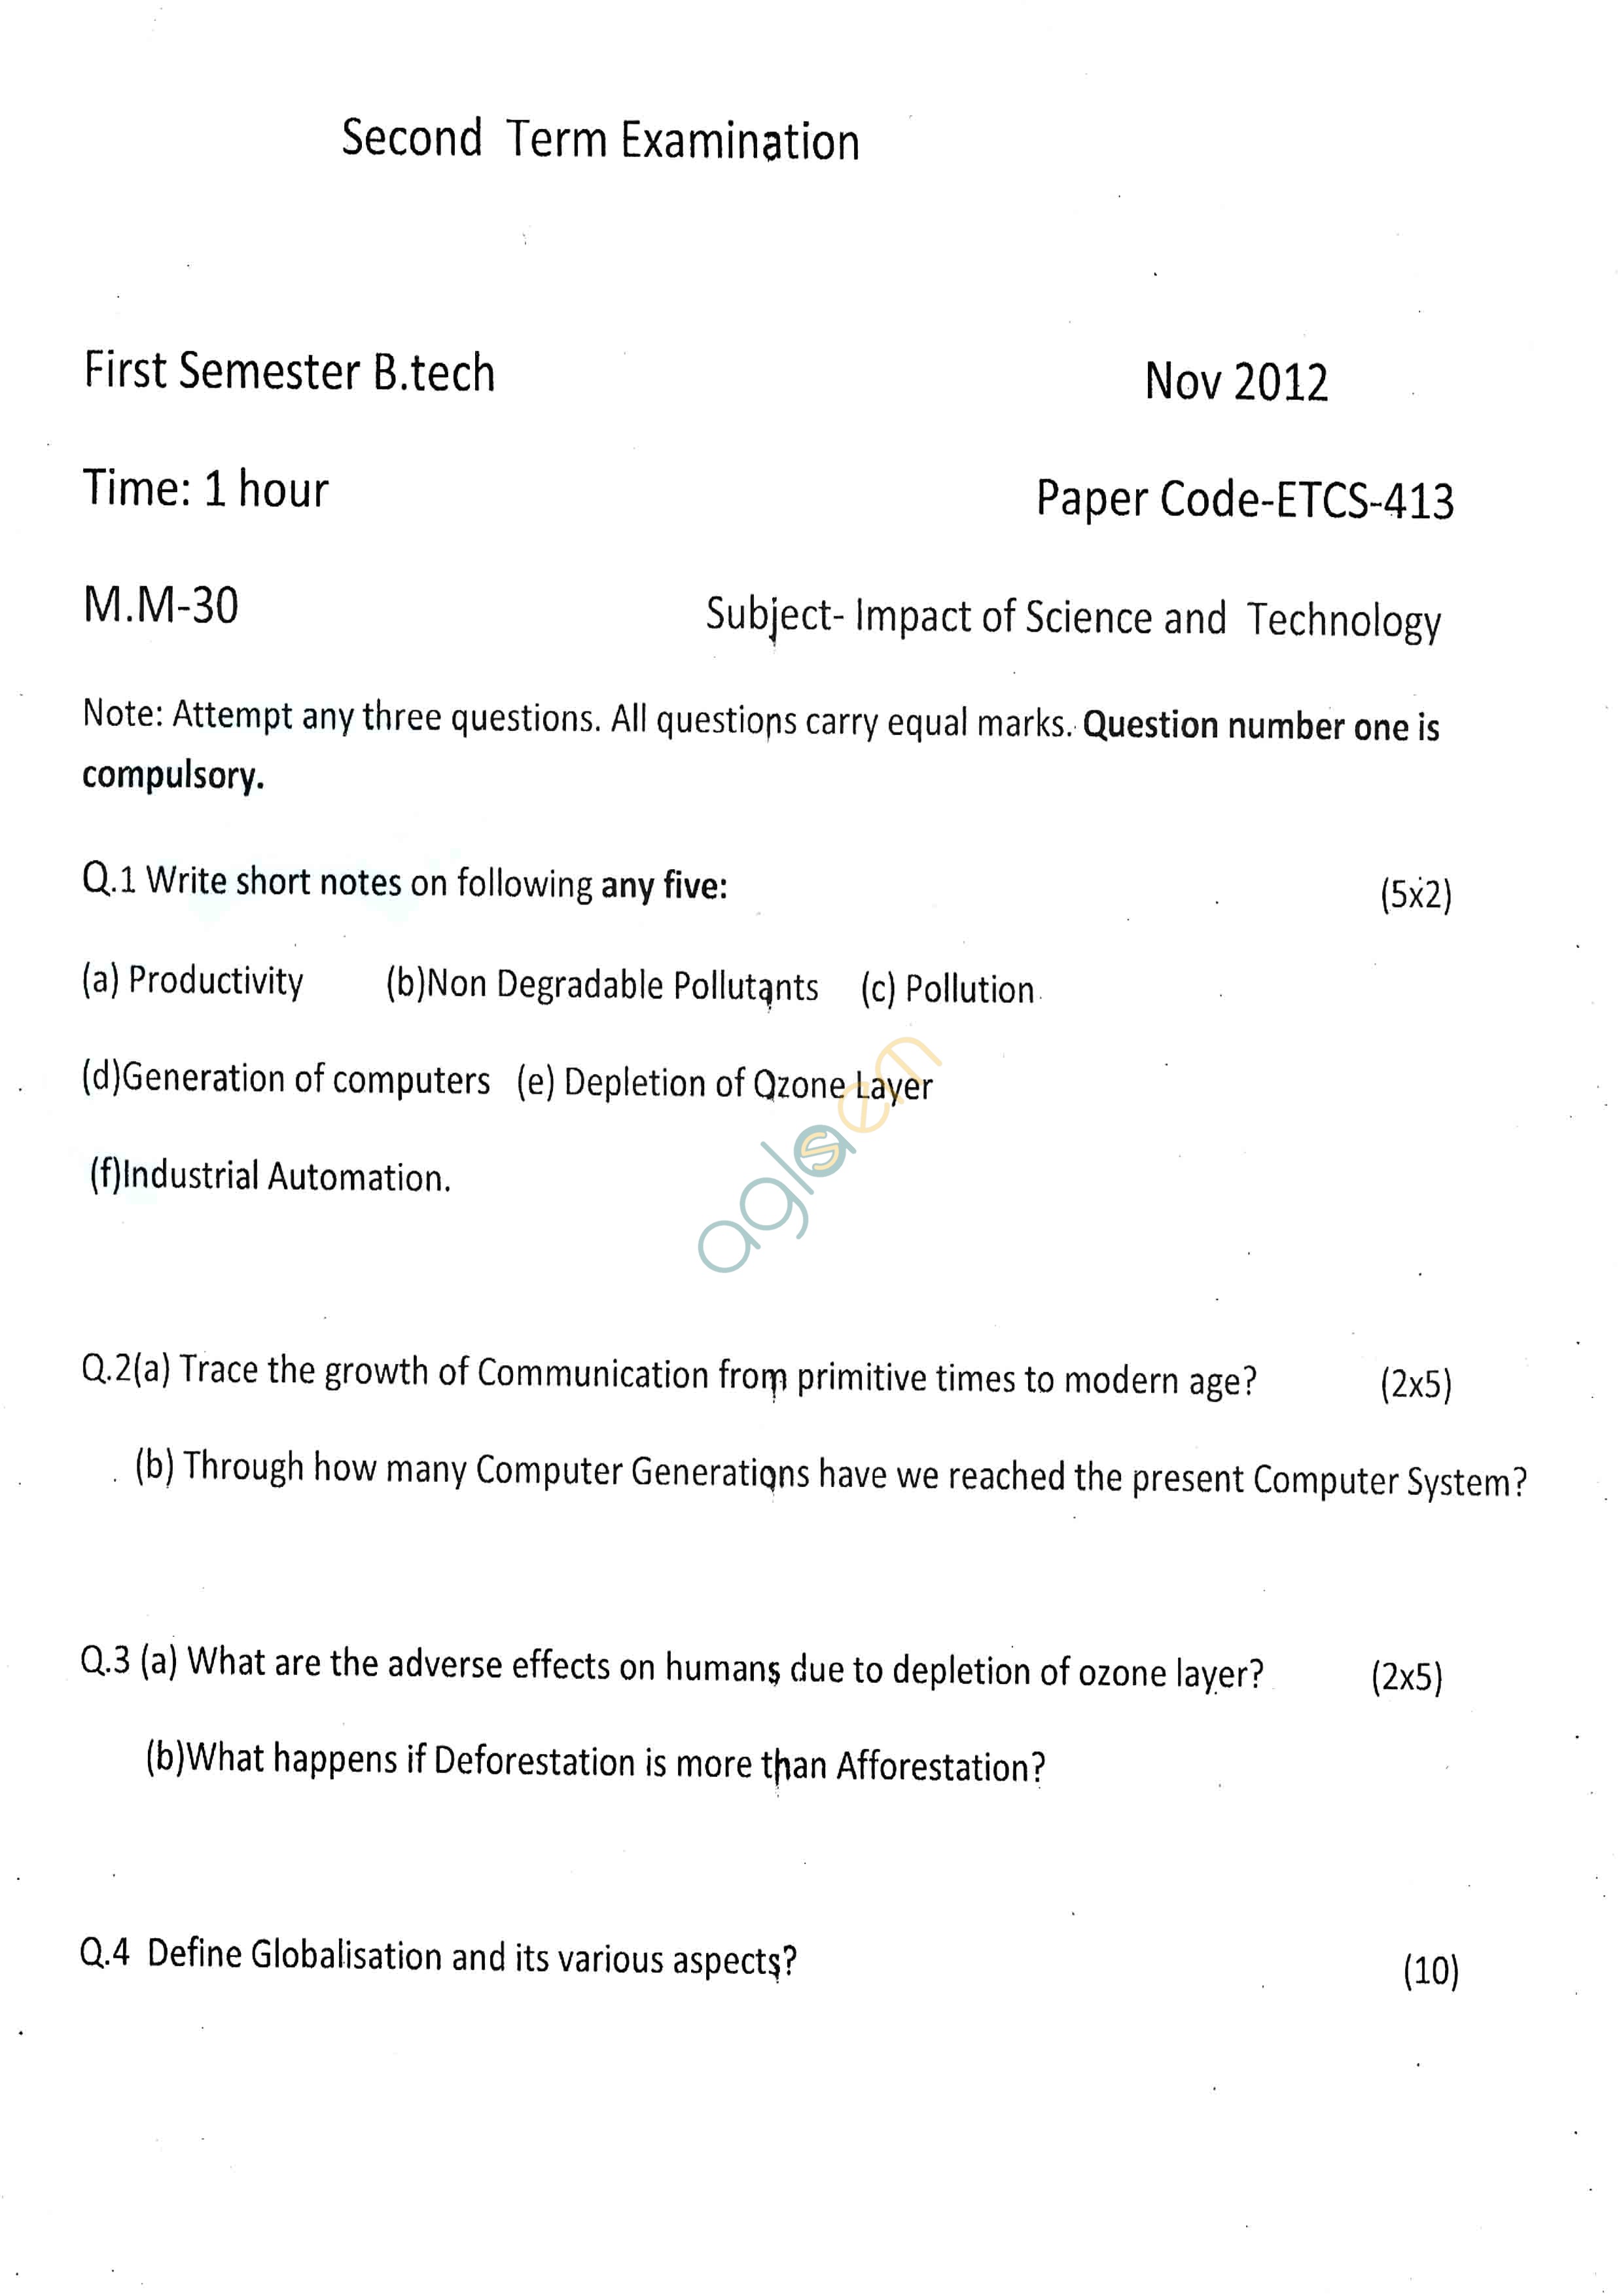 GGSIPU: Question Papers First Semester – Second Term 2012 – ETCS-413